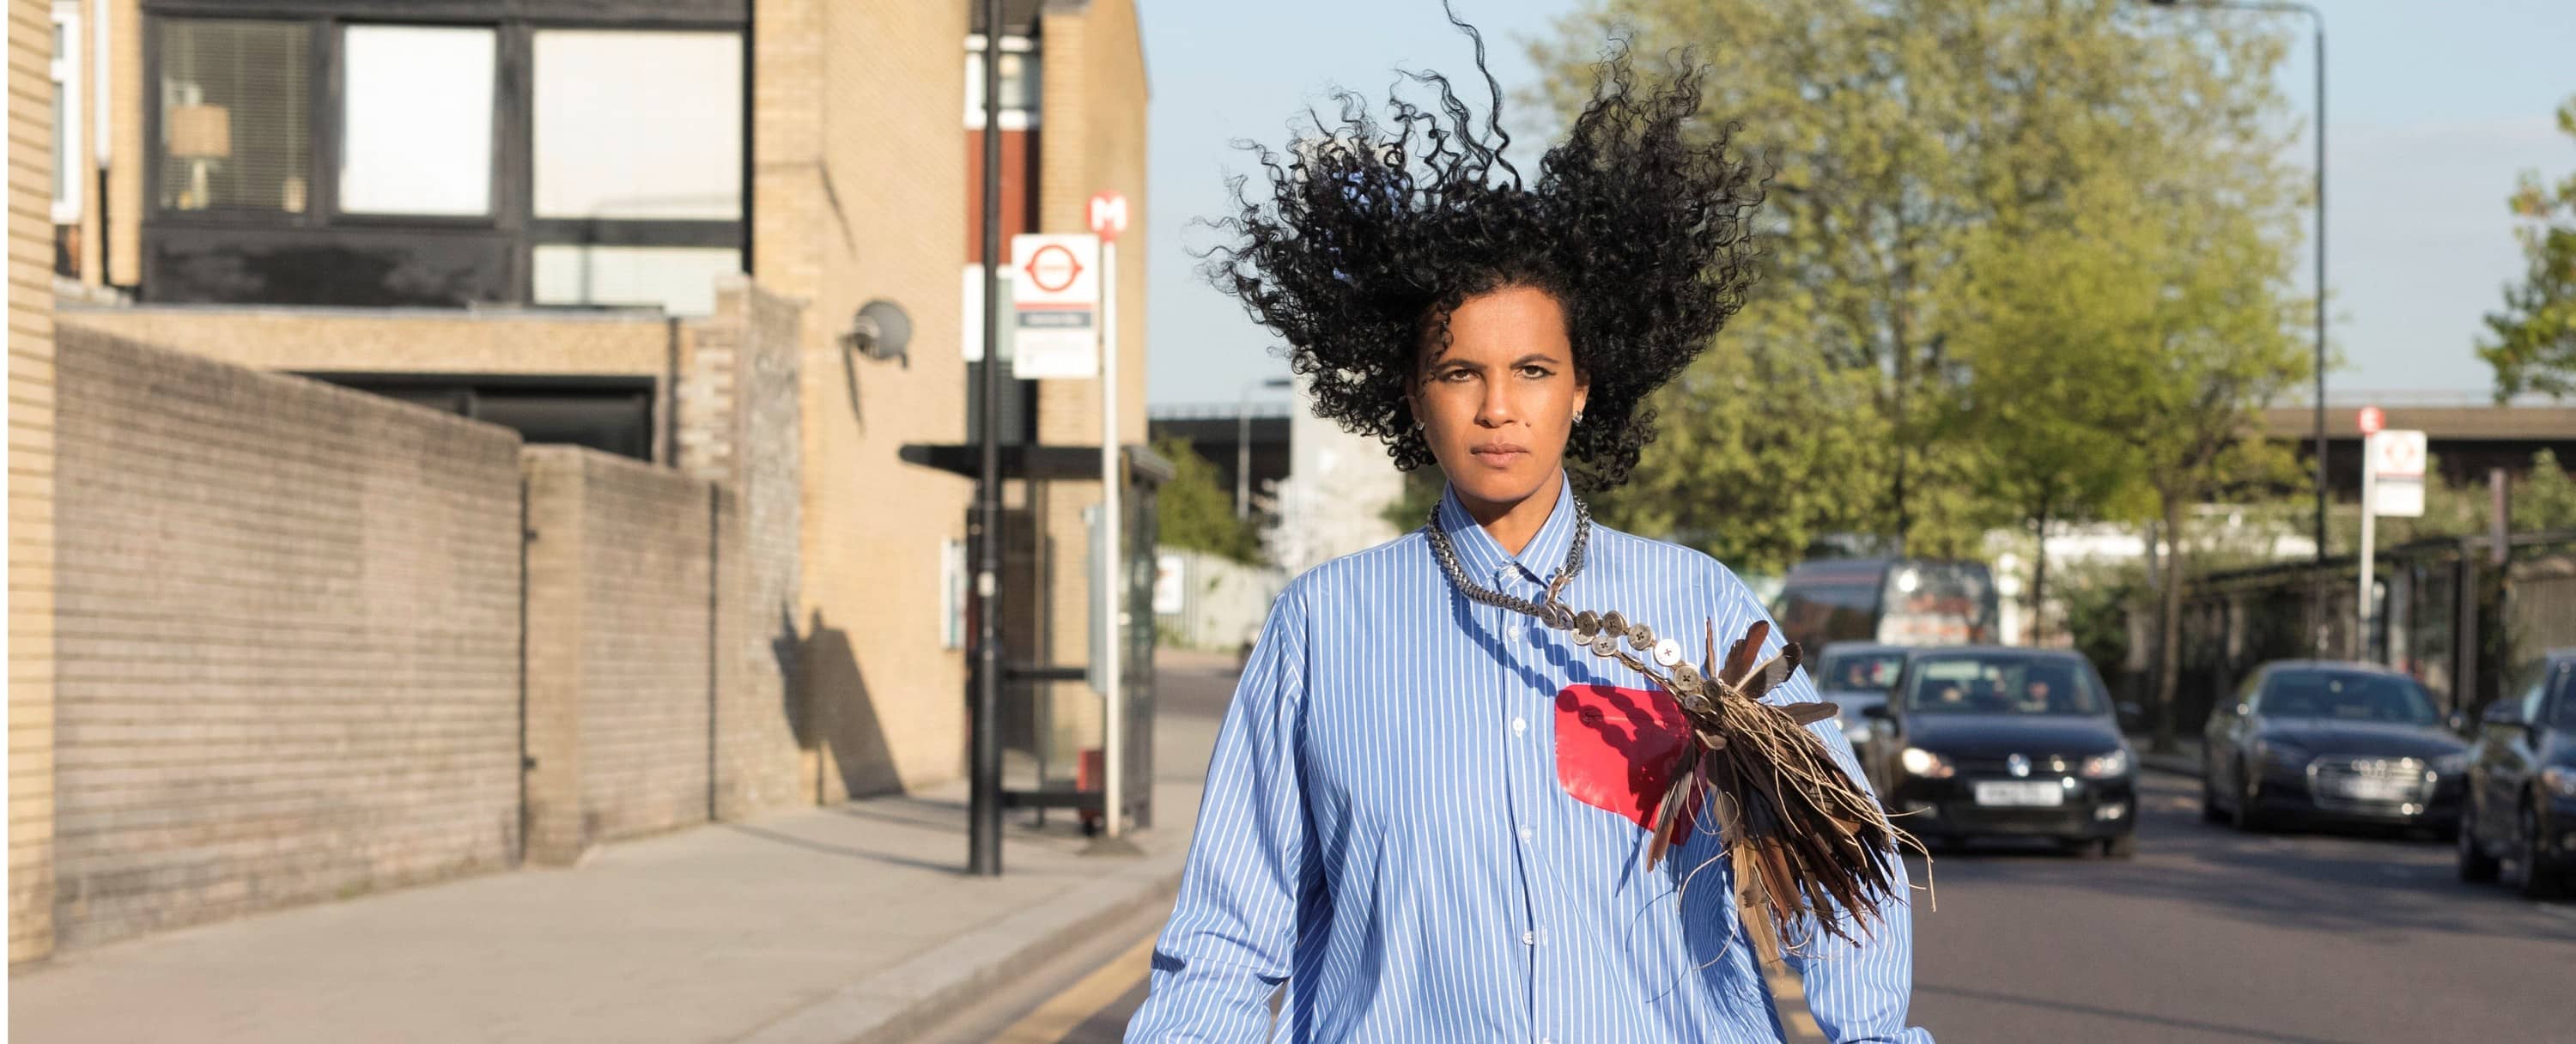 Neneh Cherry photo by Wolfgang Tillmans